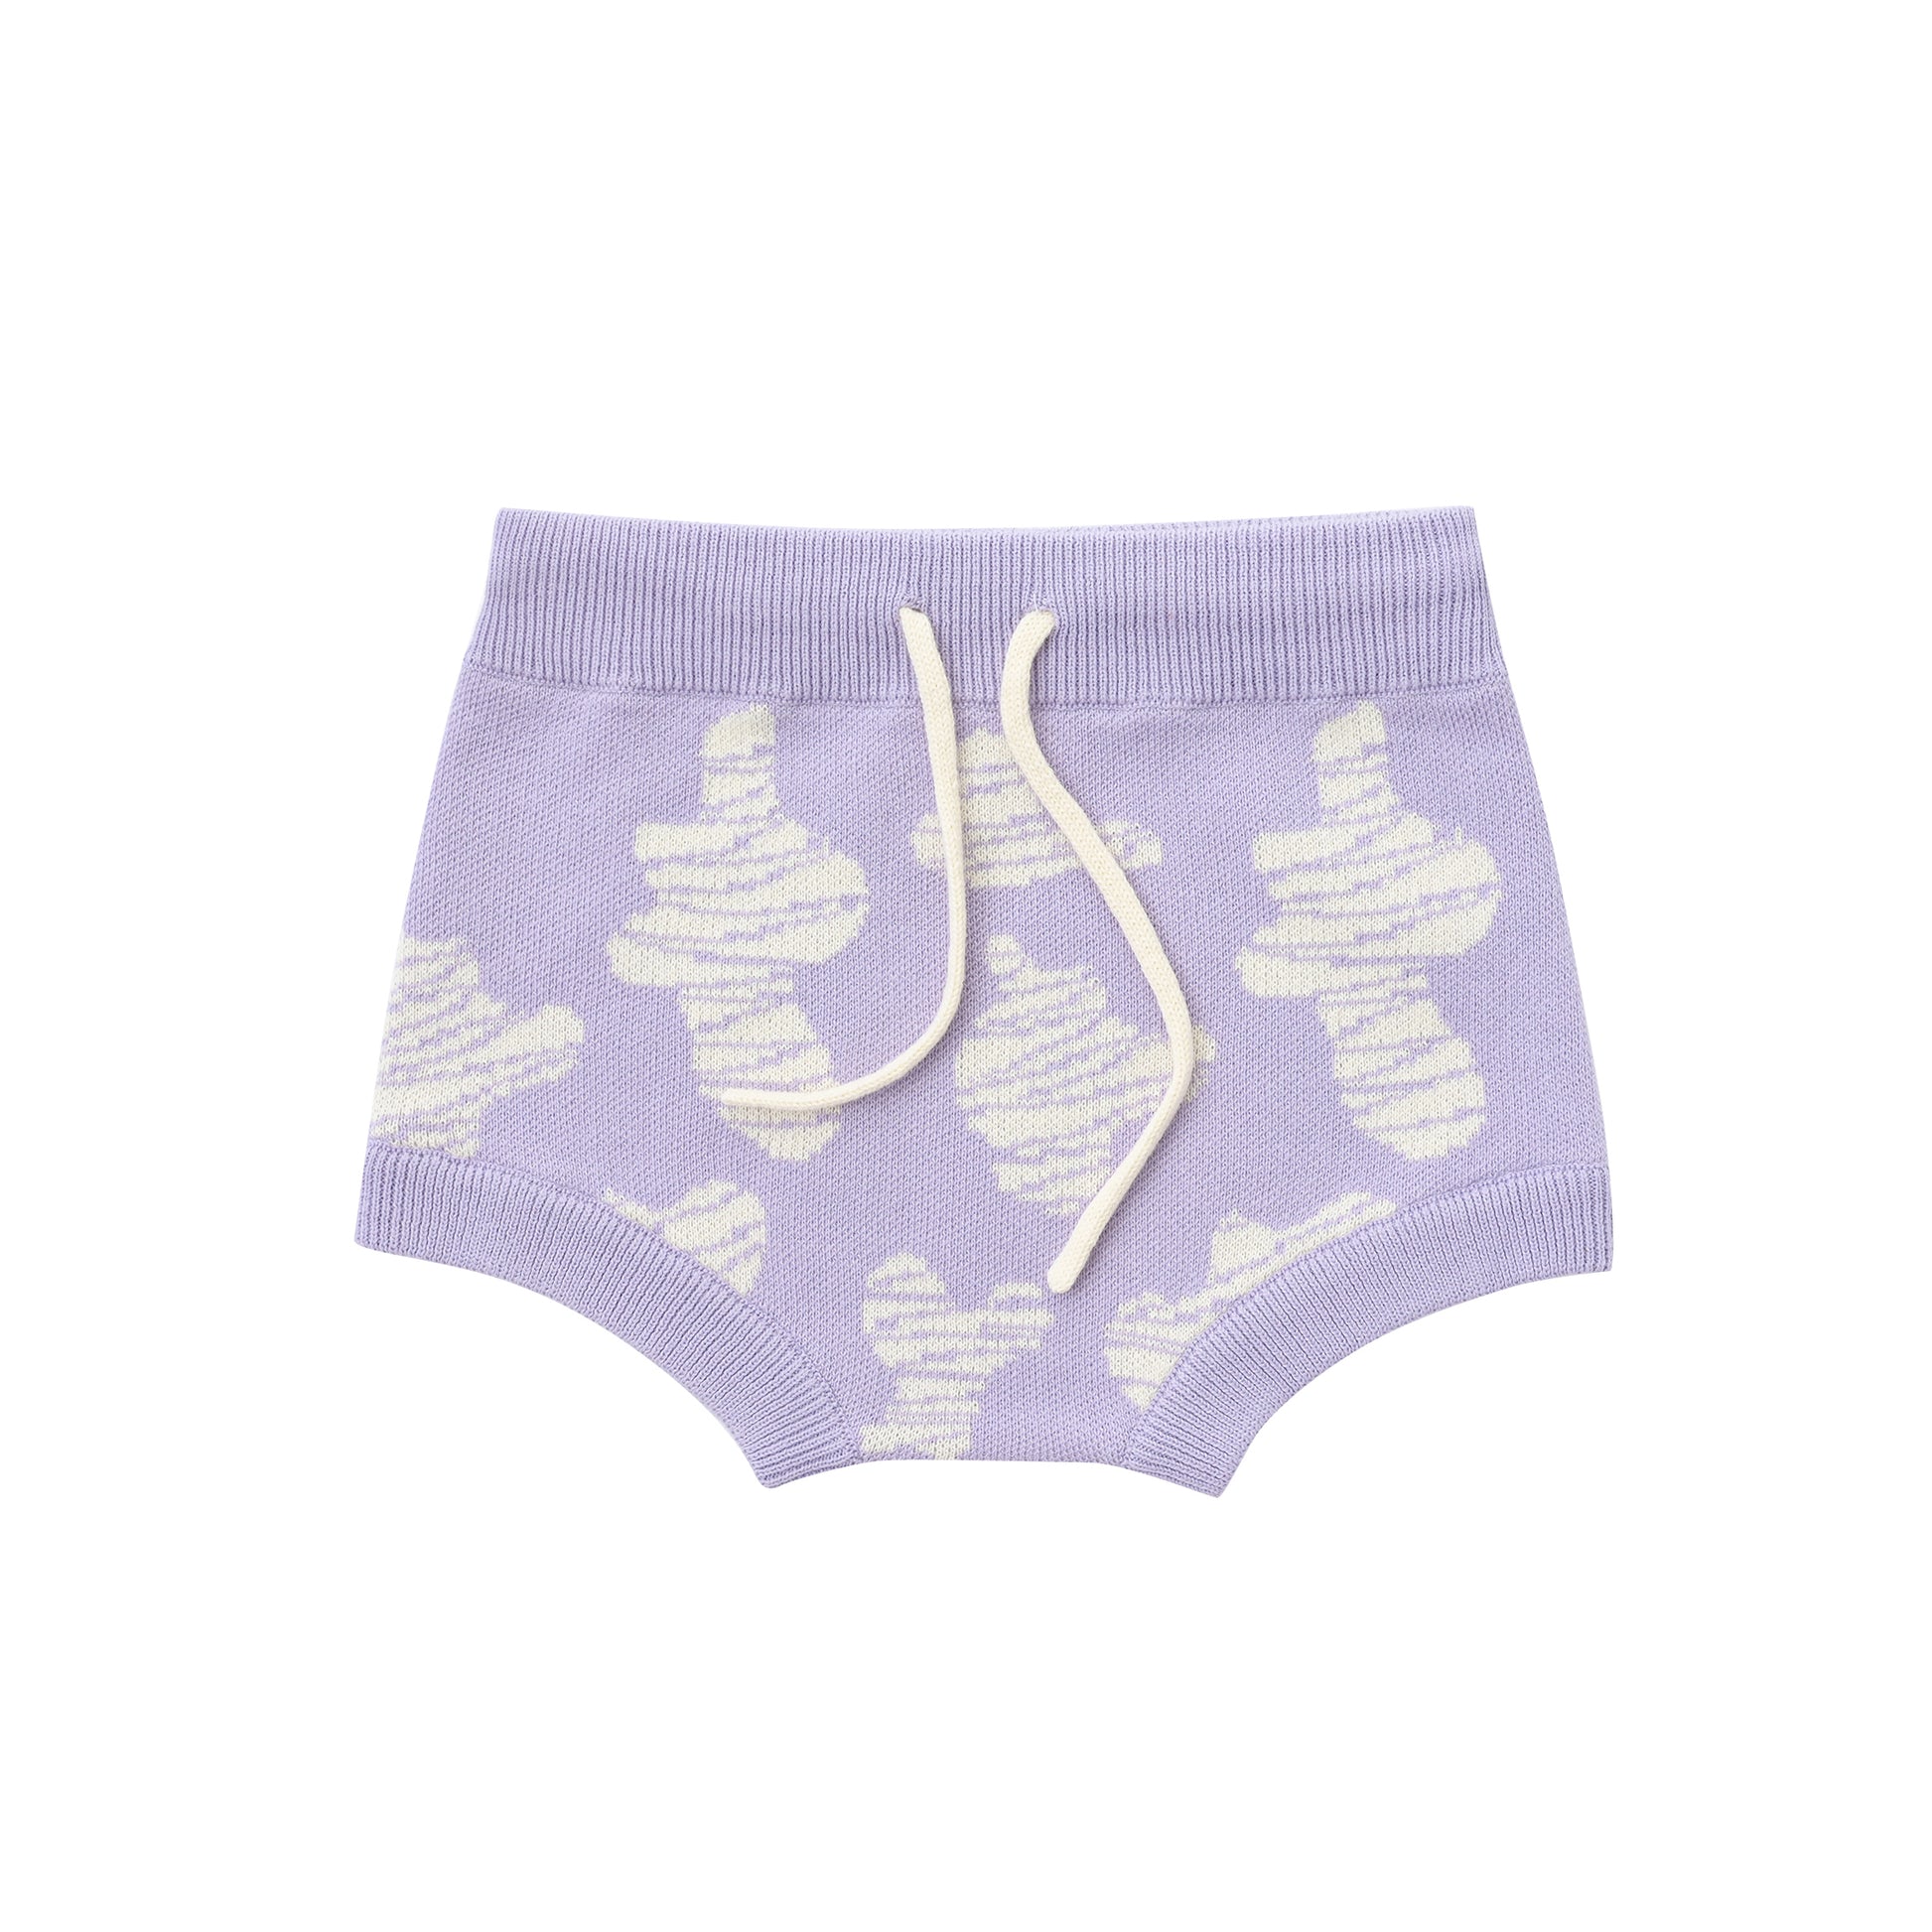 KNITTED SPOTS BLOOMERS - TARO; 100% Organic Cotton; Classy Jacquard Bloomers made from GOTS-certified organic cotton; 'TARO SPOTS' Jacquard pattern; Elasticated waistband. 